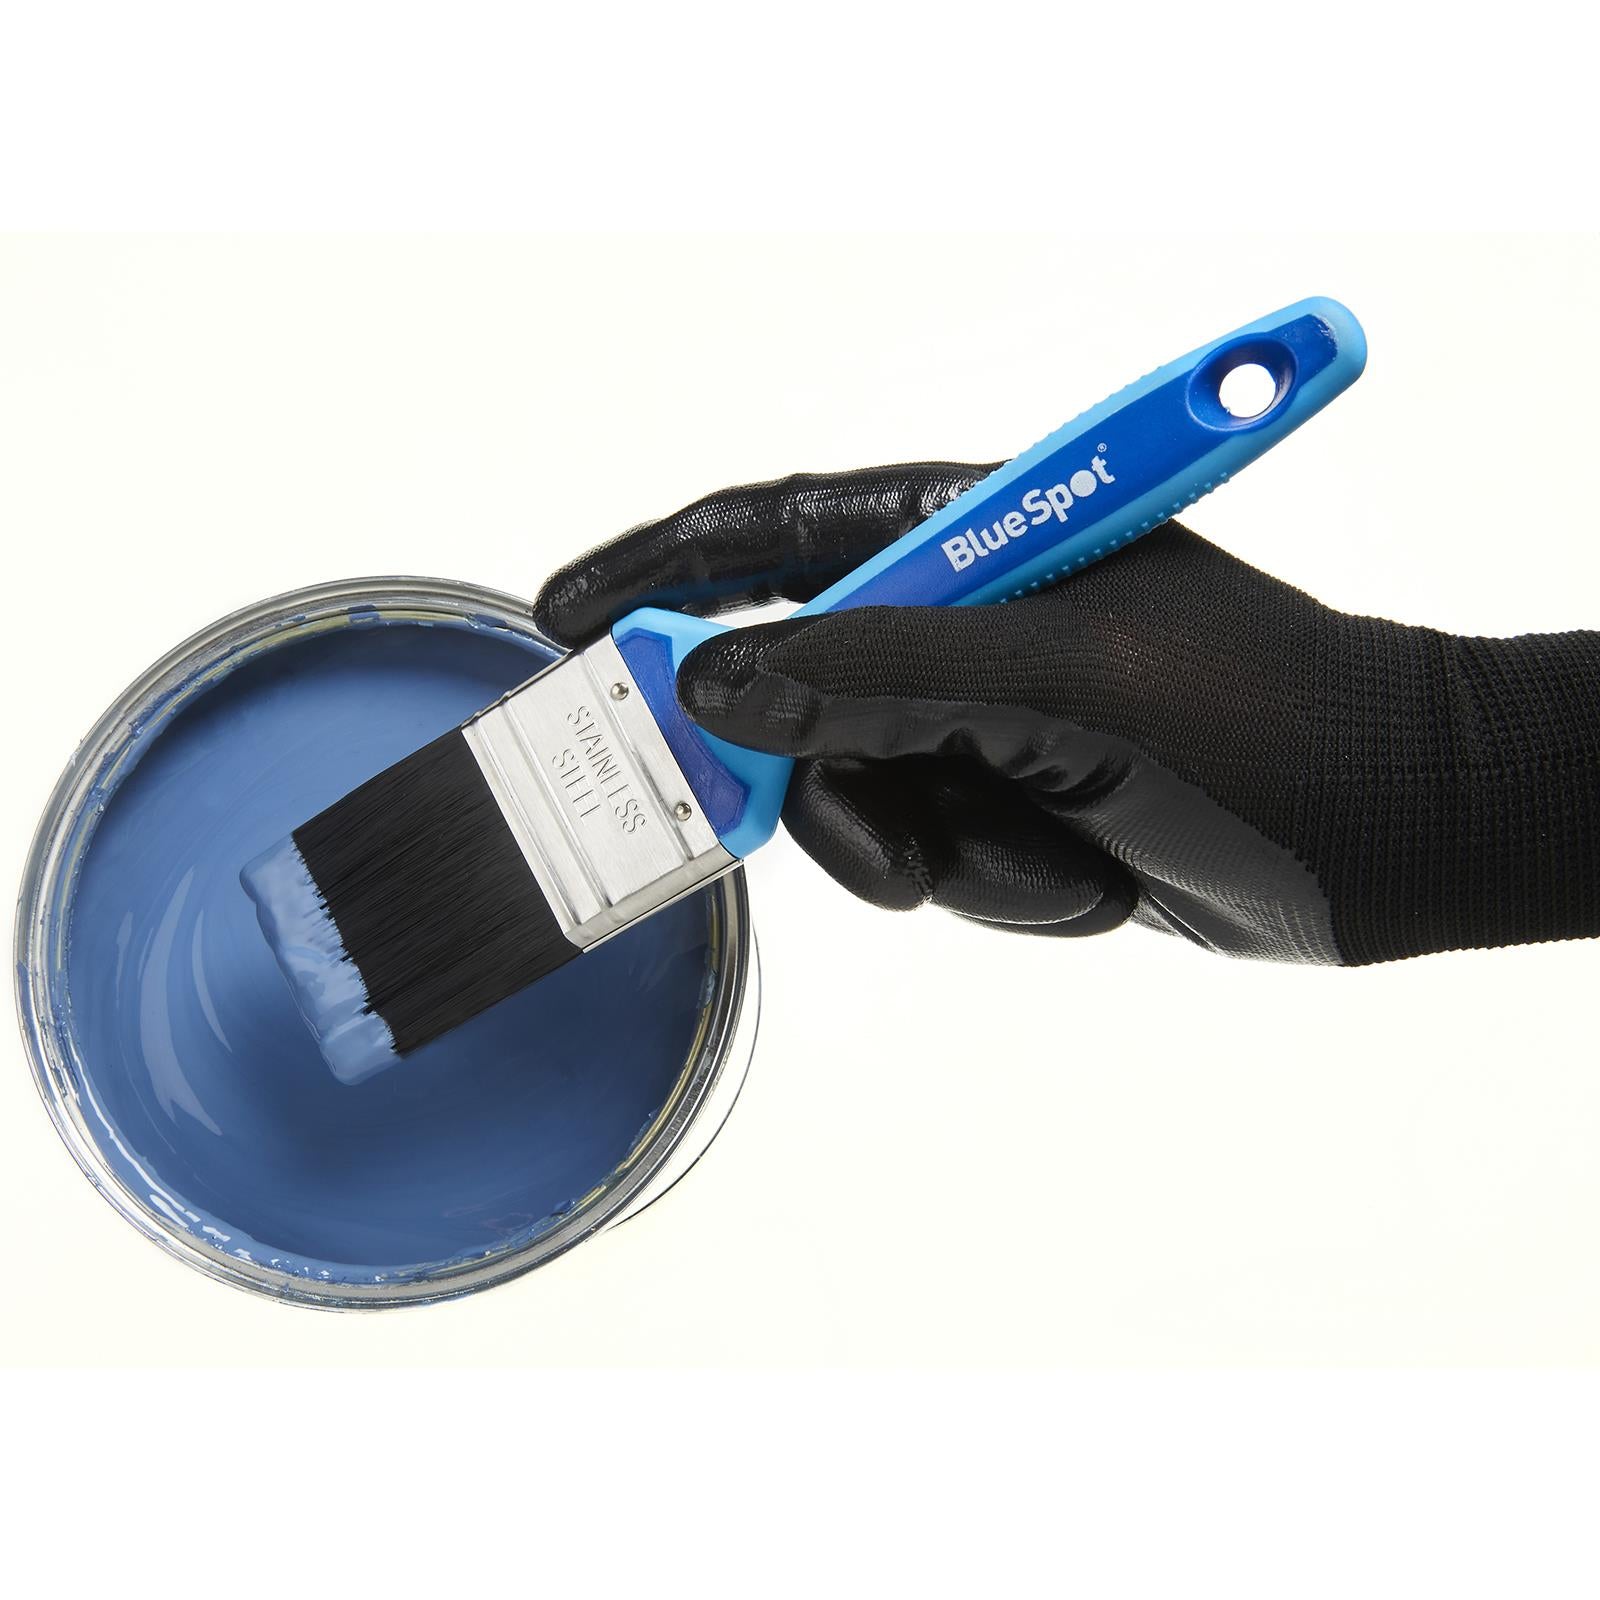 BlueSpot Synthetic Paint Brush with Soft Grip Handle 50mm (2")